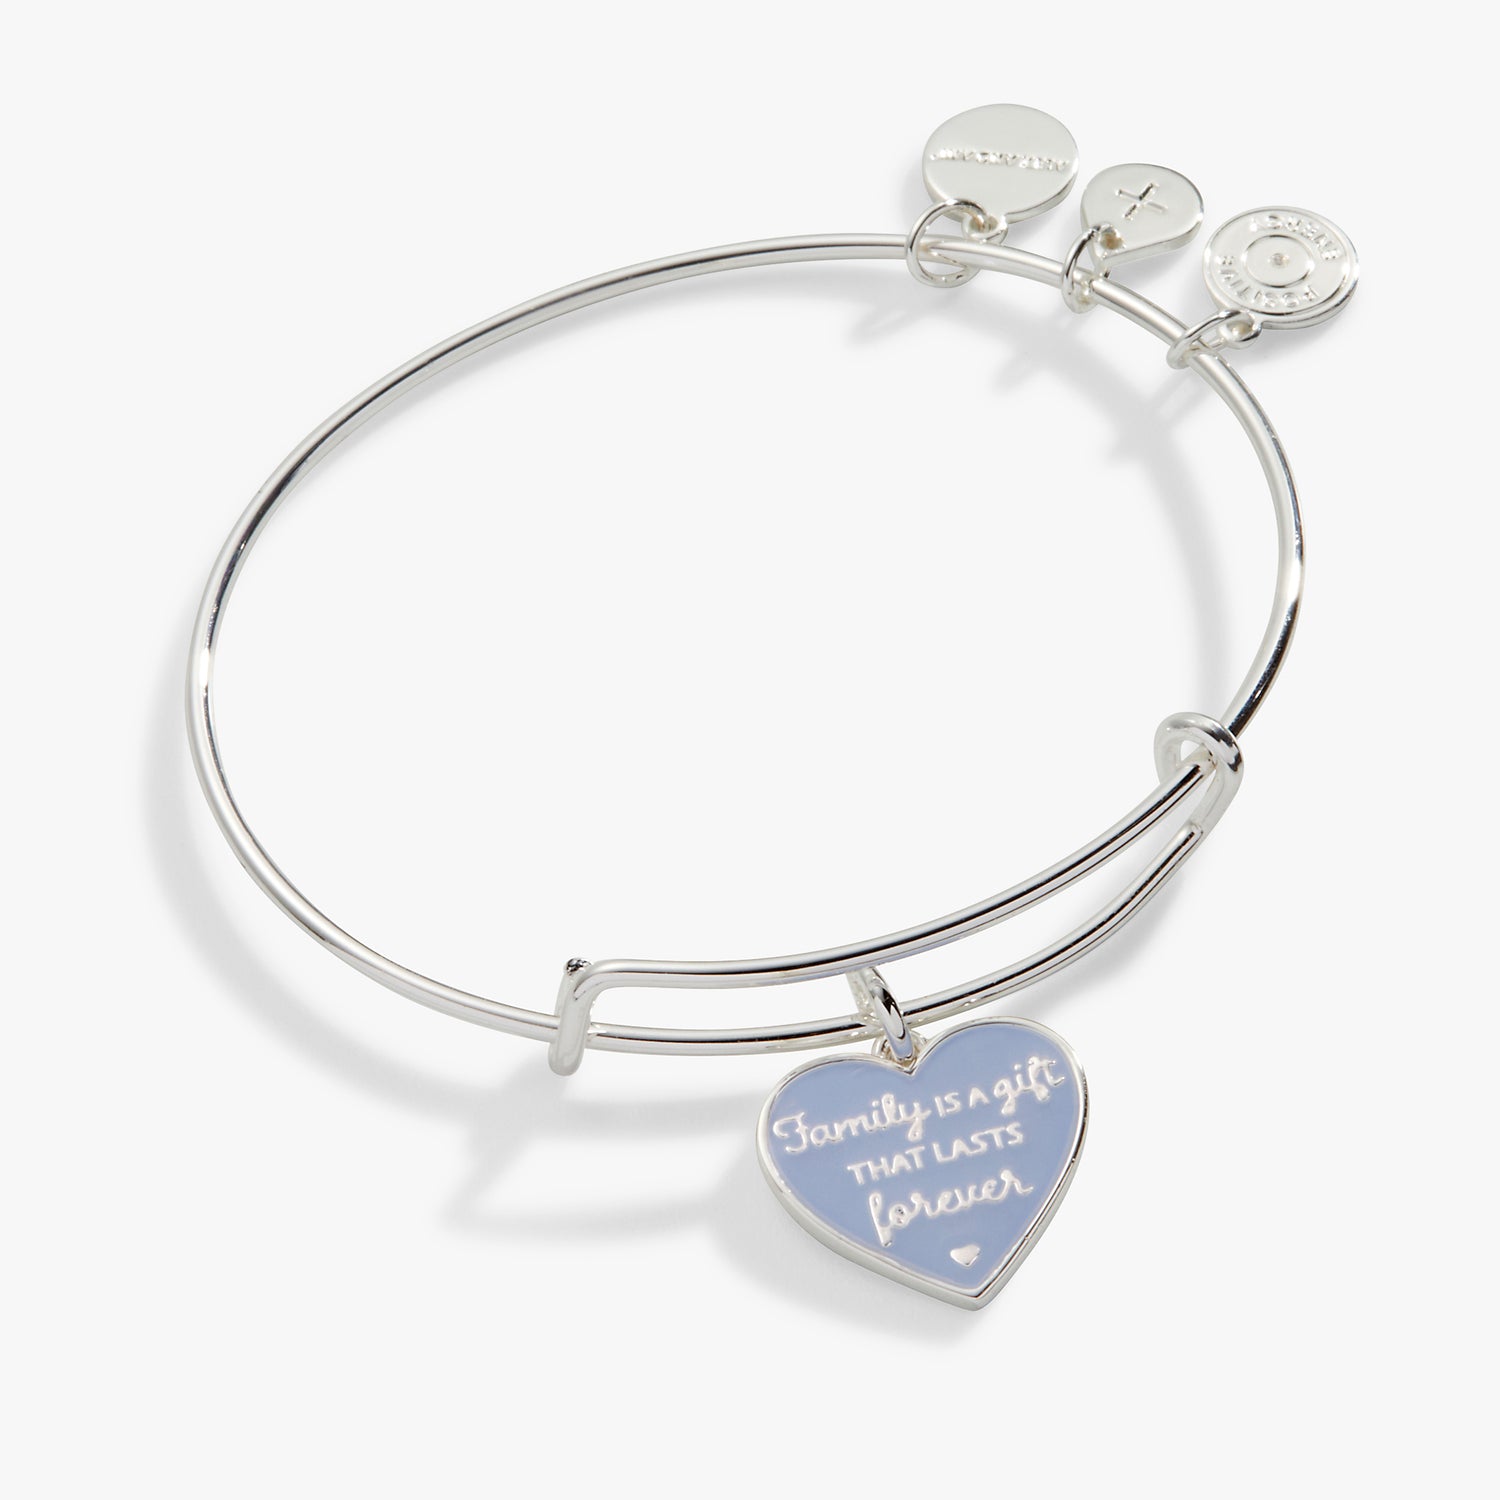 Family is a Gift That Lasts Forever Charm Bangle